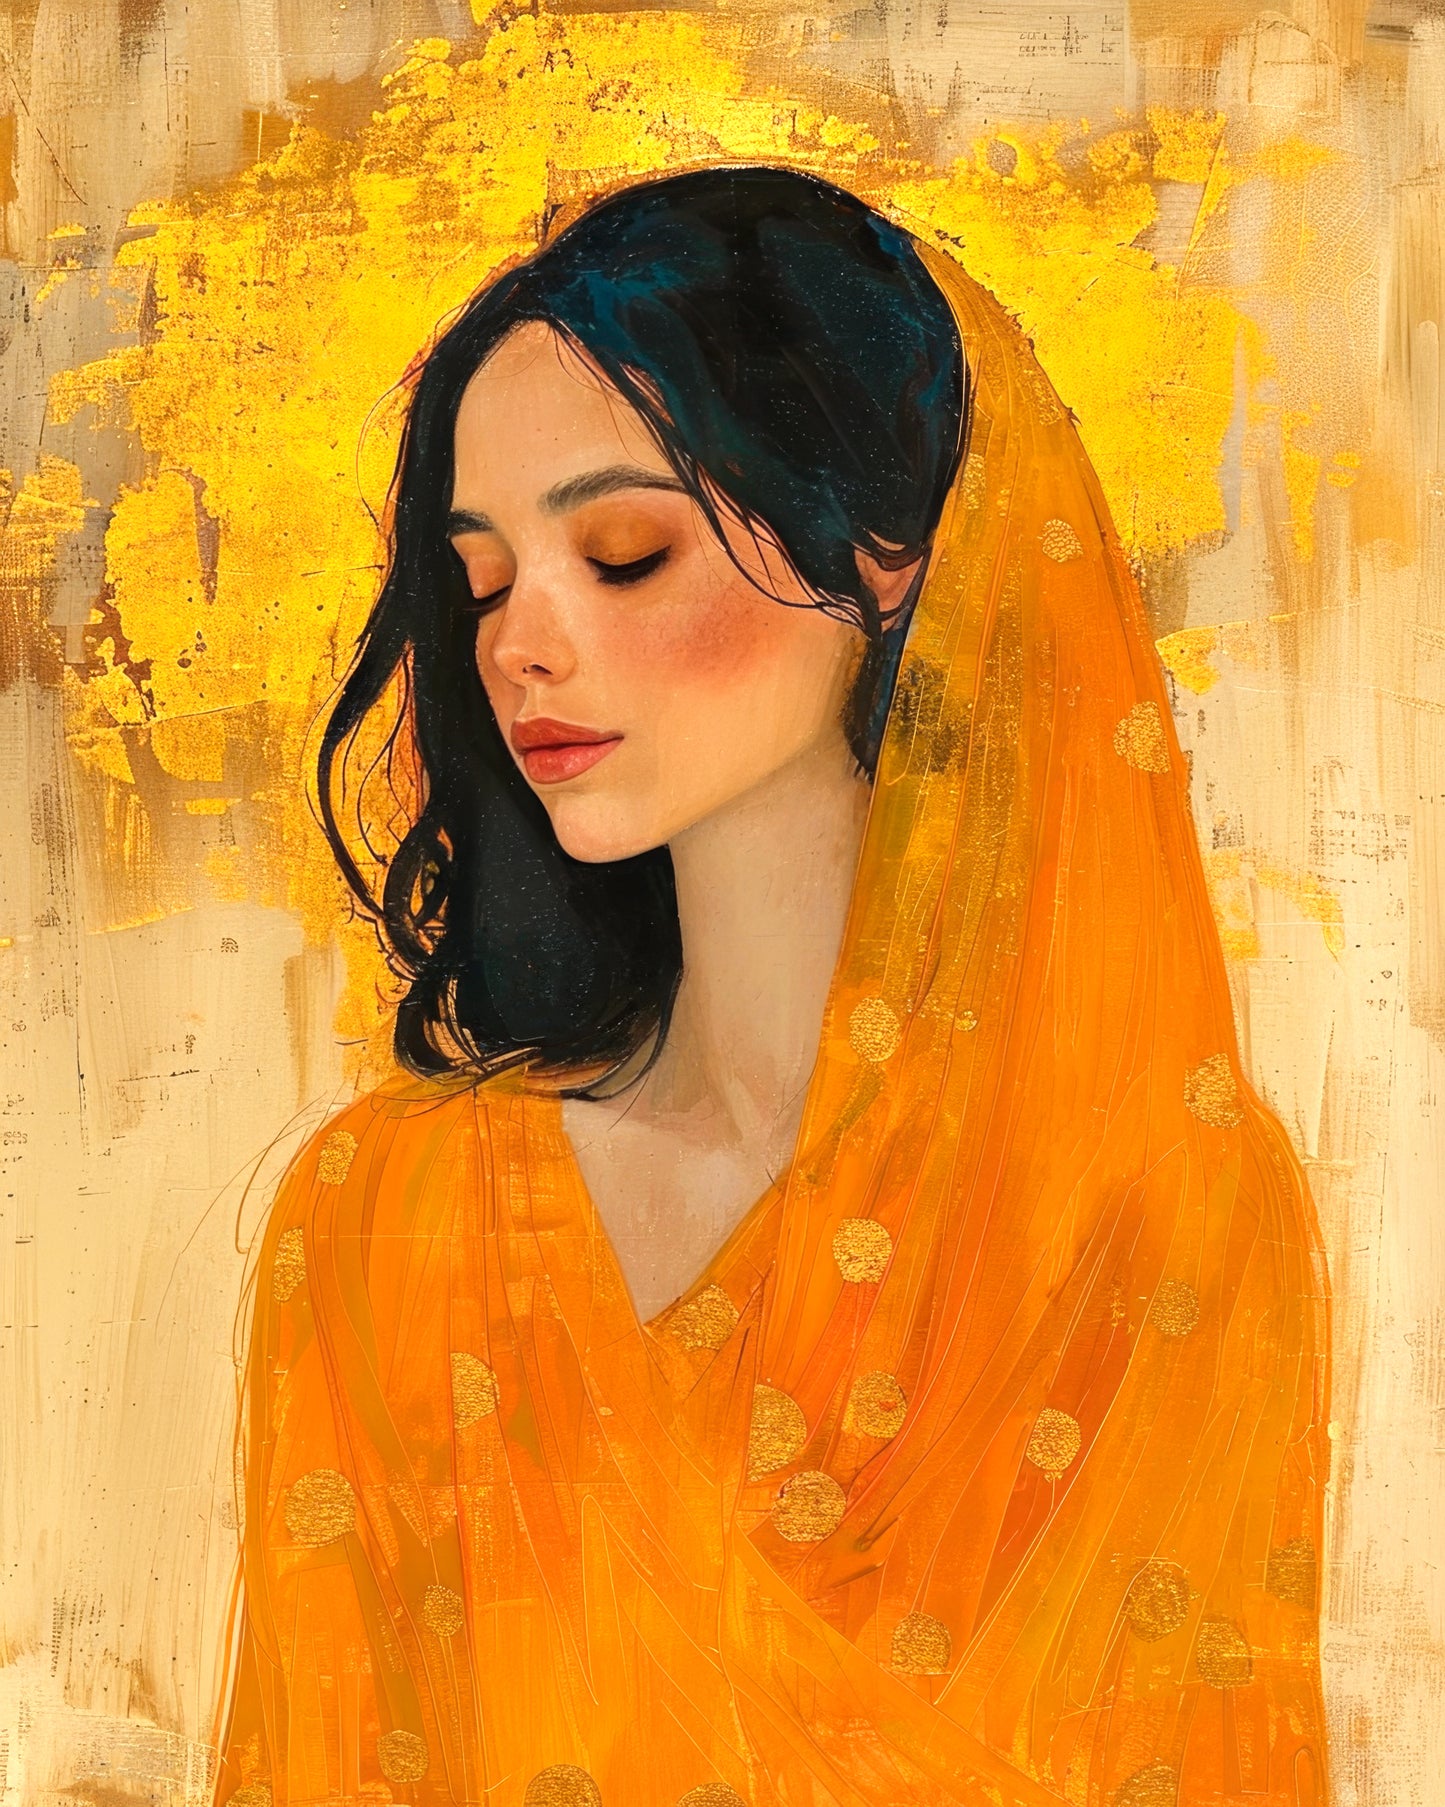 Fine art print featuring a beautiful woman in a Klimt-inspired style, adorned in an orange veil with golden patterns against a golden, textured background. This art print is a stunning example of an artwork print.